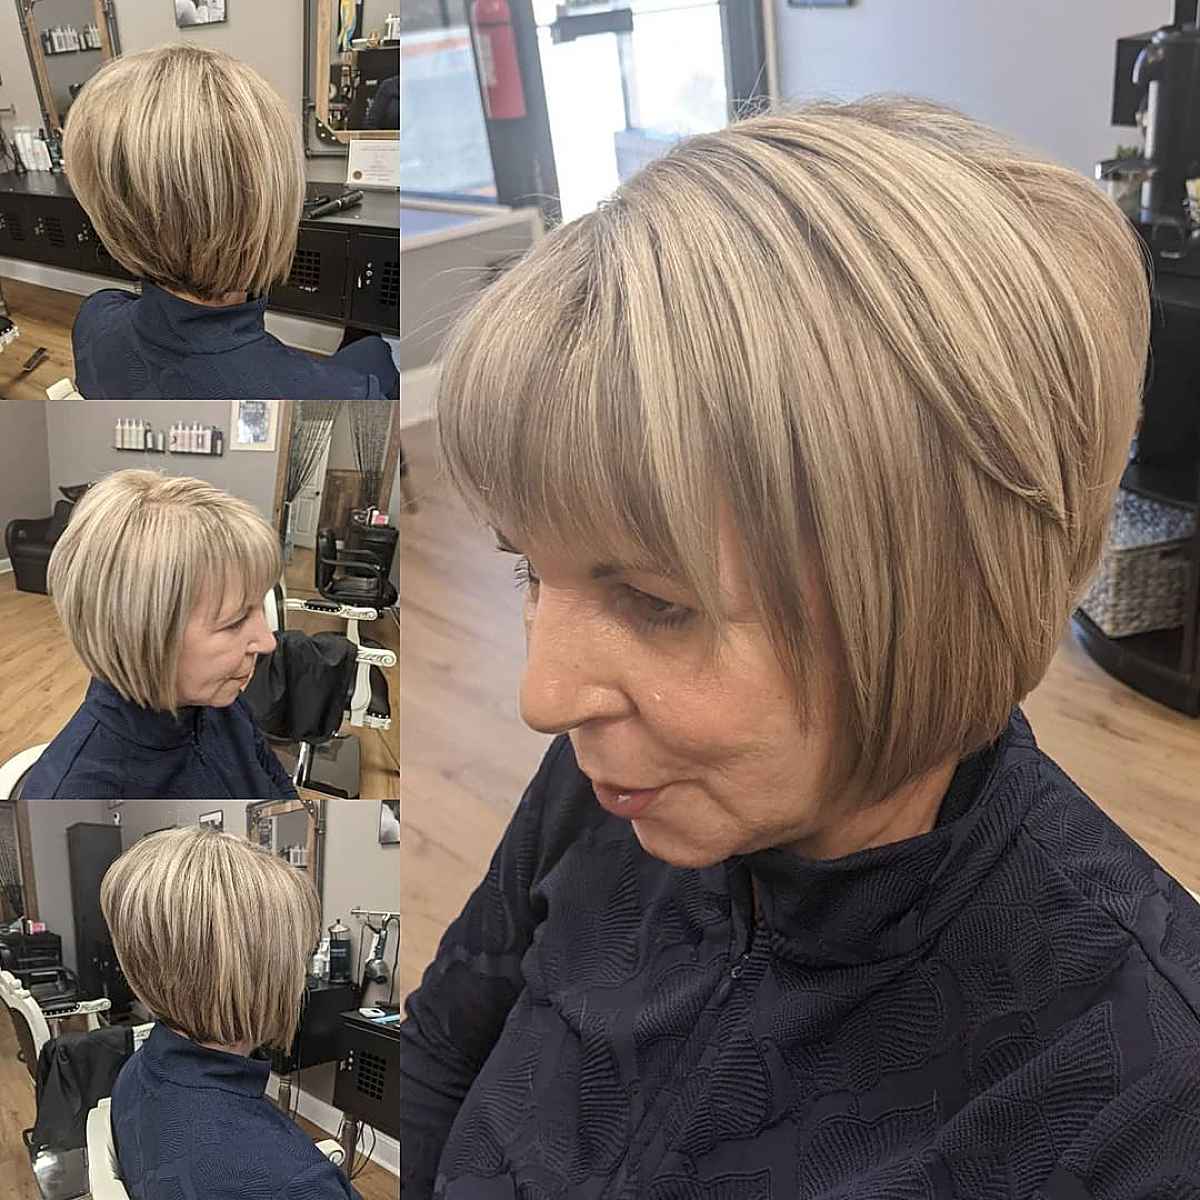 The edgy wedge haircut with bangs on a female over 60